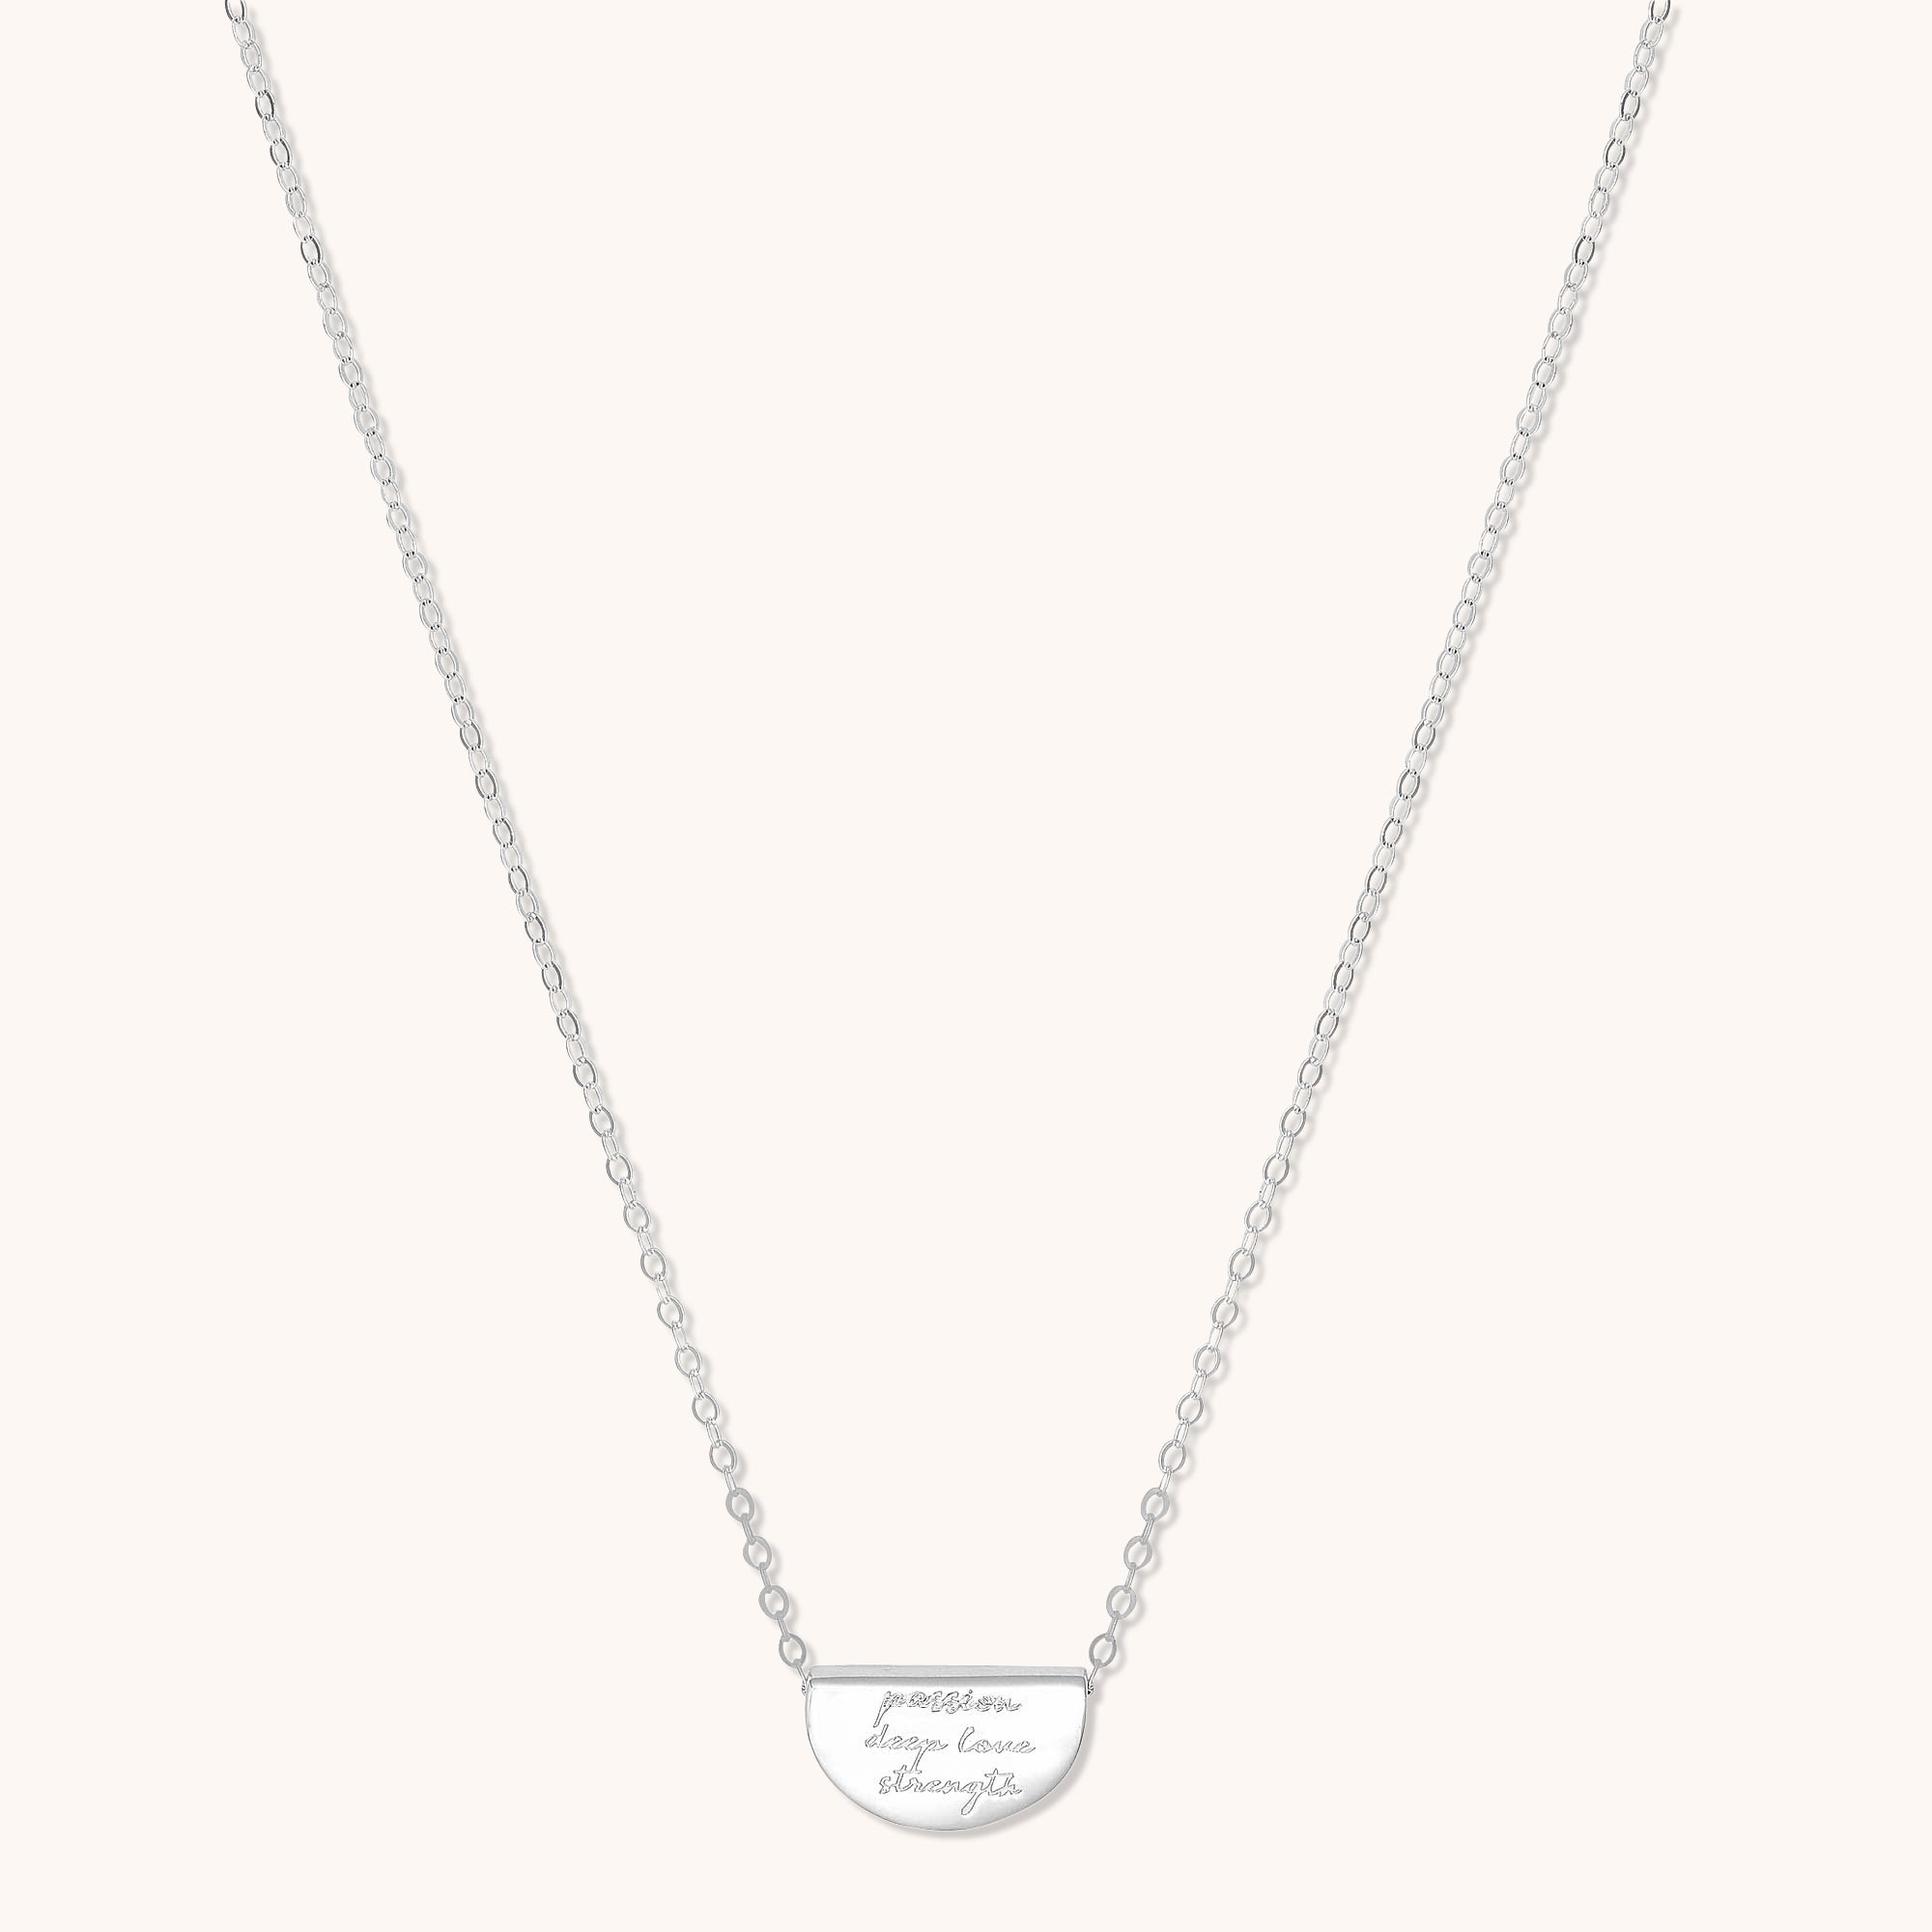 Birth Flower Necklace January (Carnation) Silver